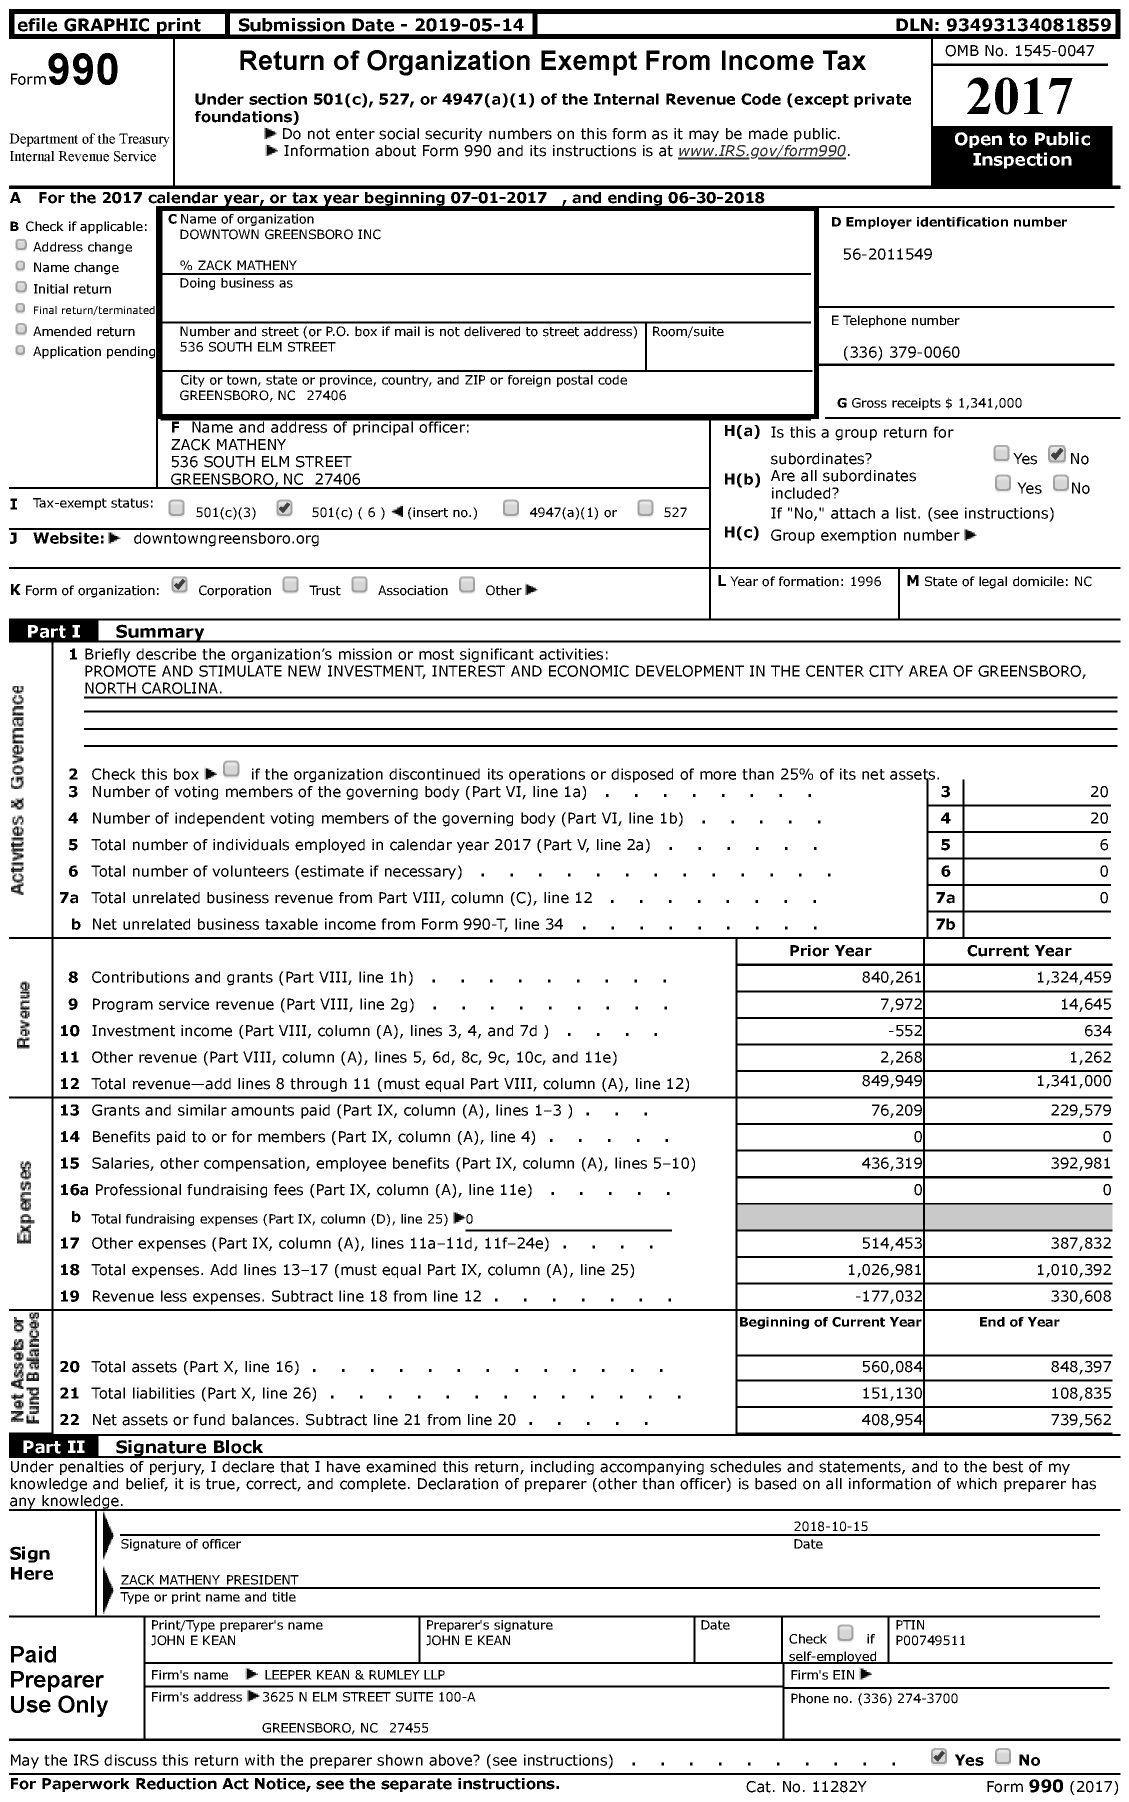 Image of first page of 2017 Form 990 for Downtown Greensboro (DGI)